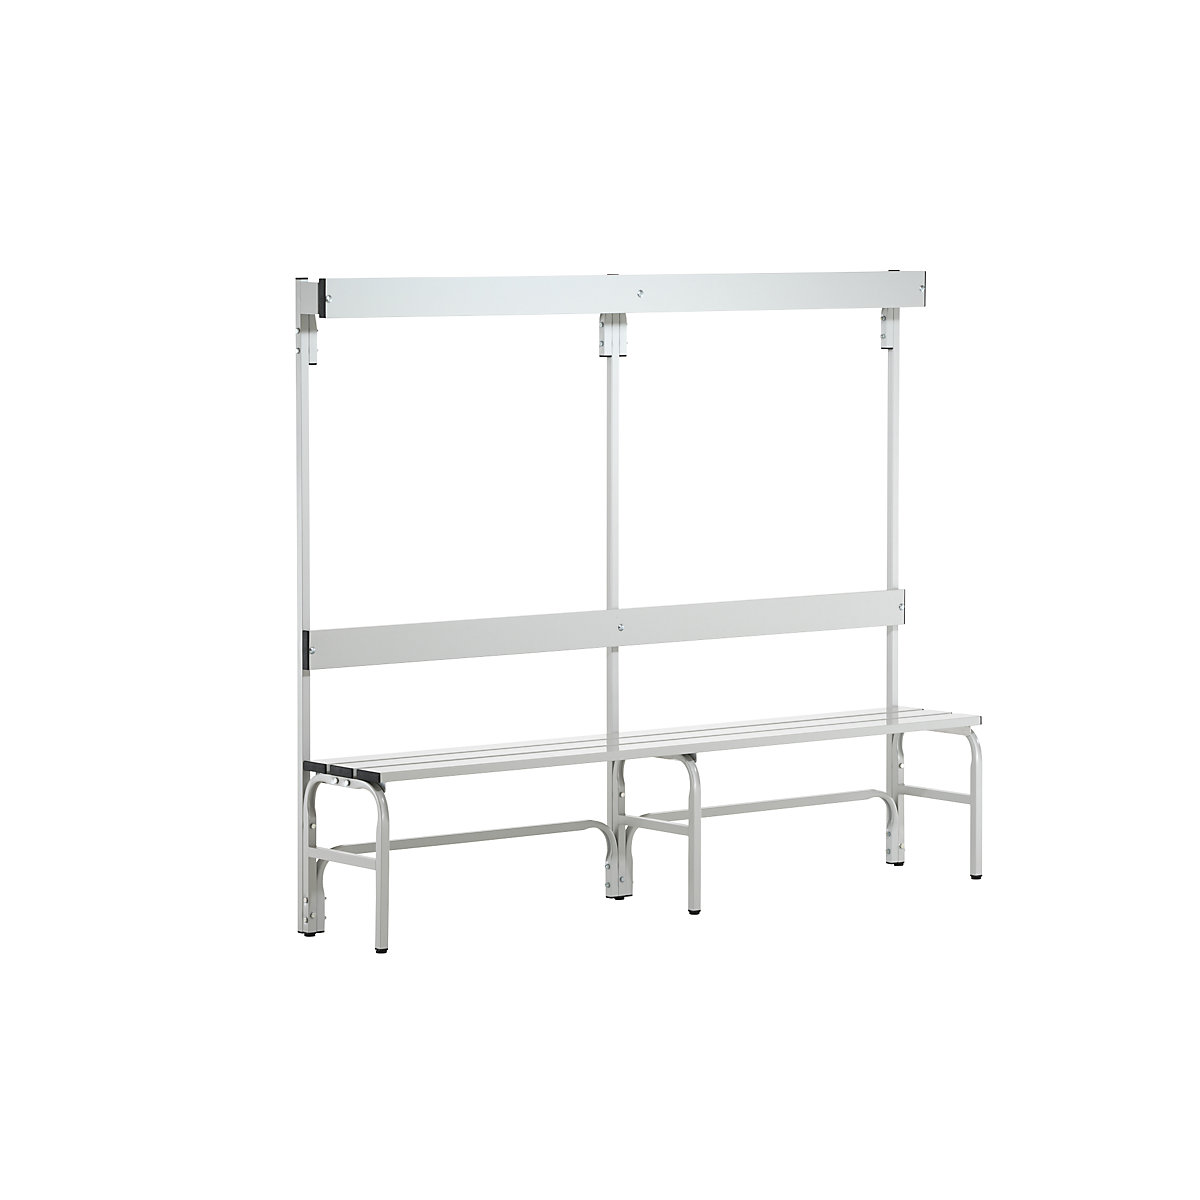 Sypro – Changing room bench made of stainless steel, HxD 1650 x 375 mm, length 1500 mm, 6 hooks, light grey